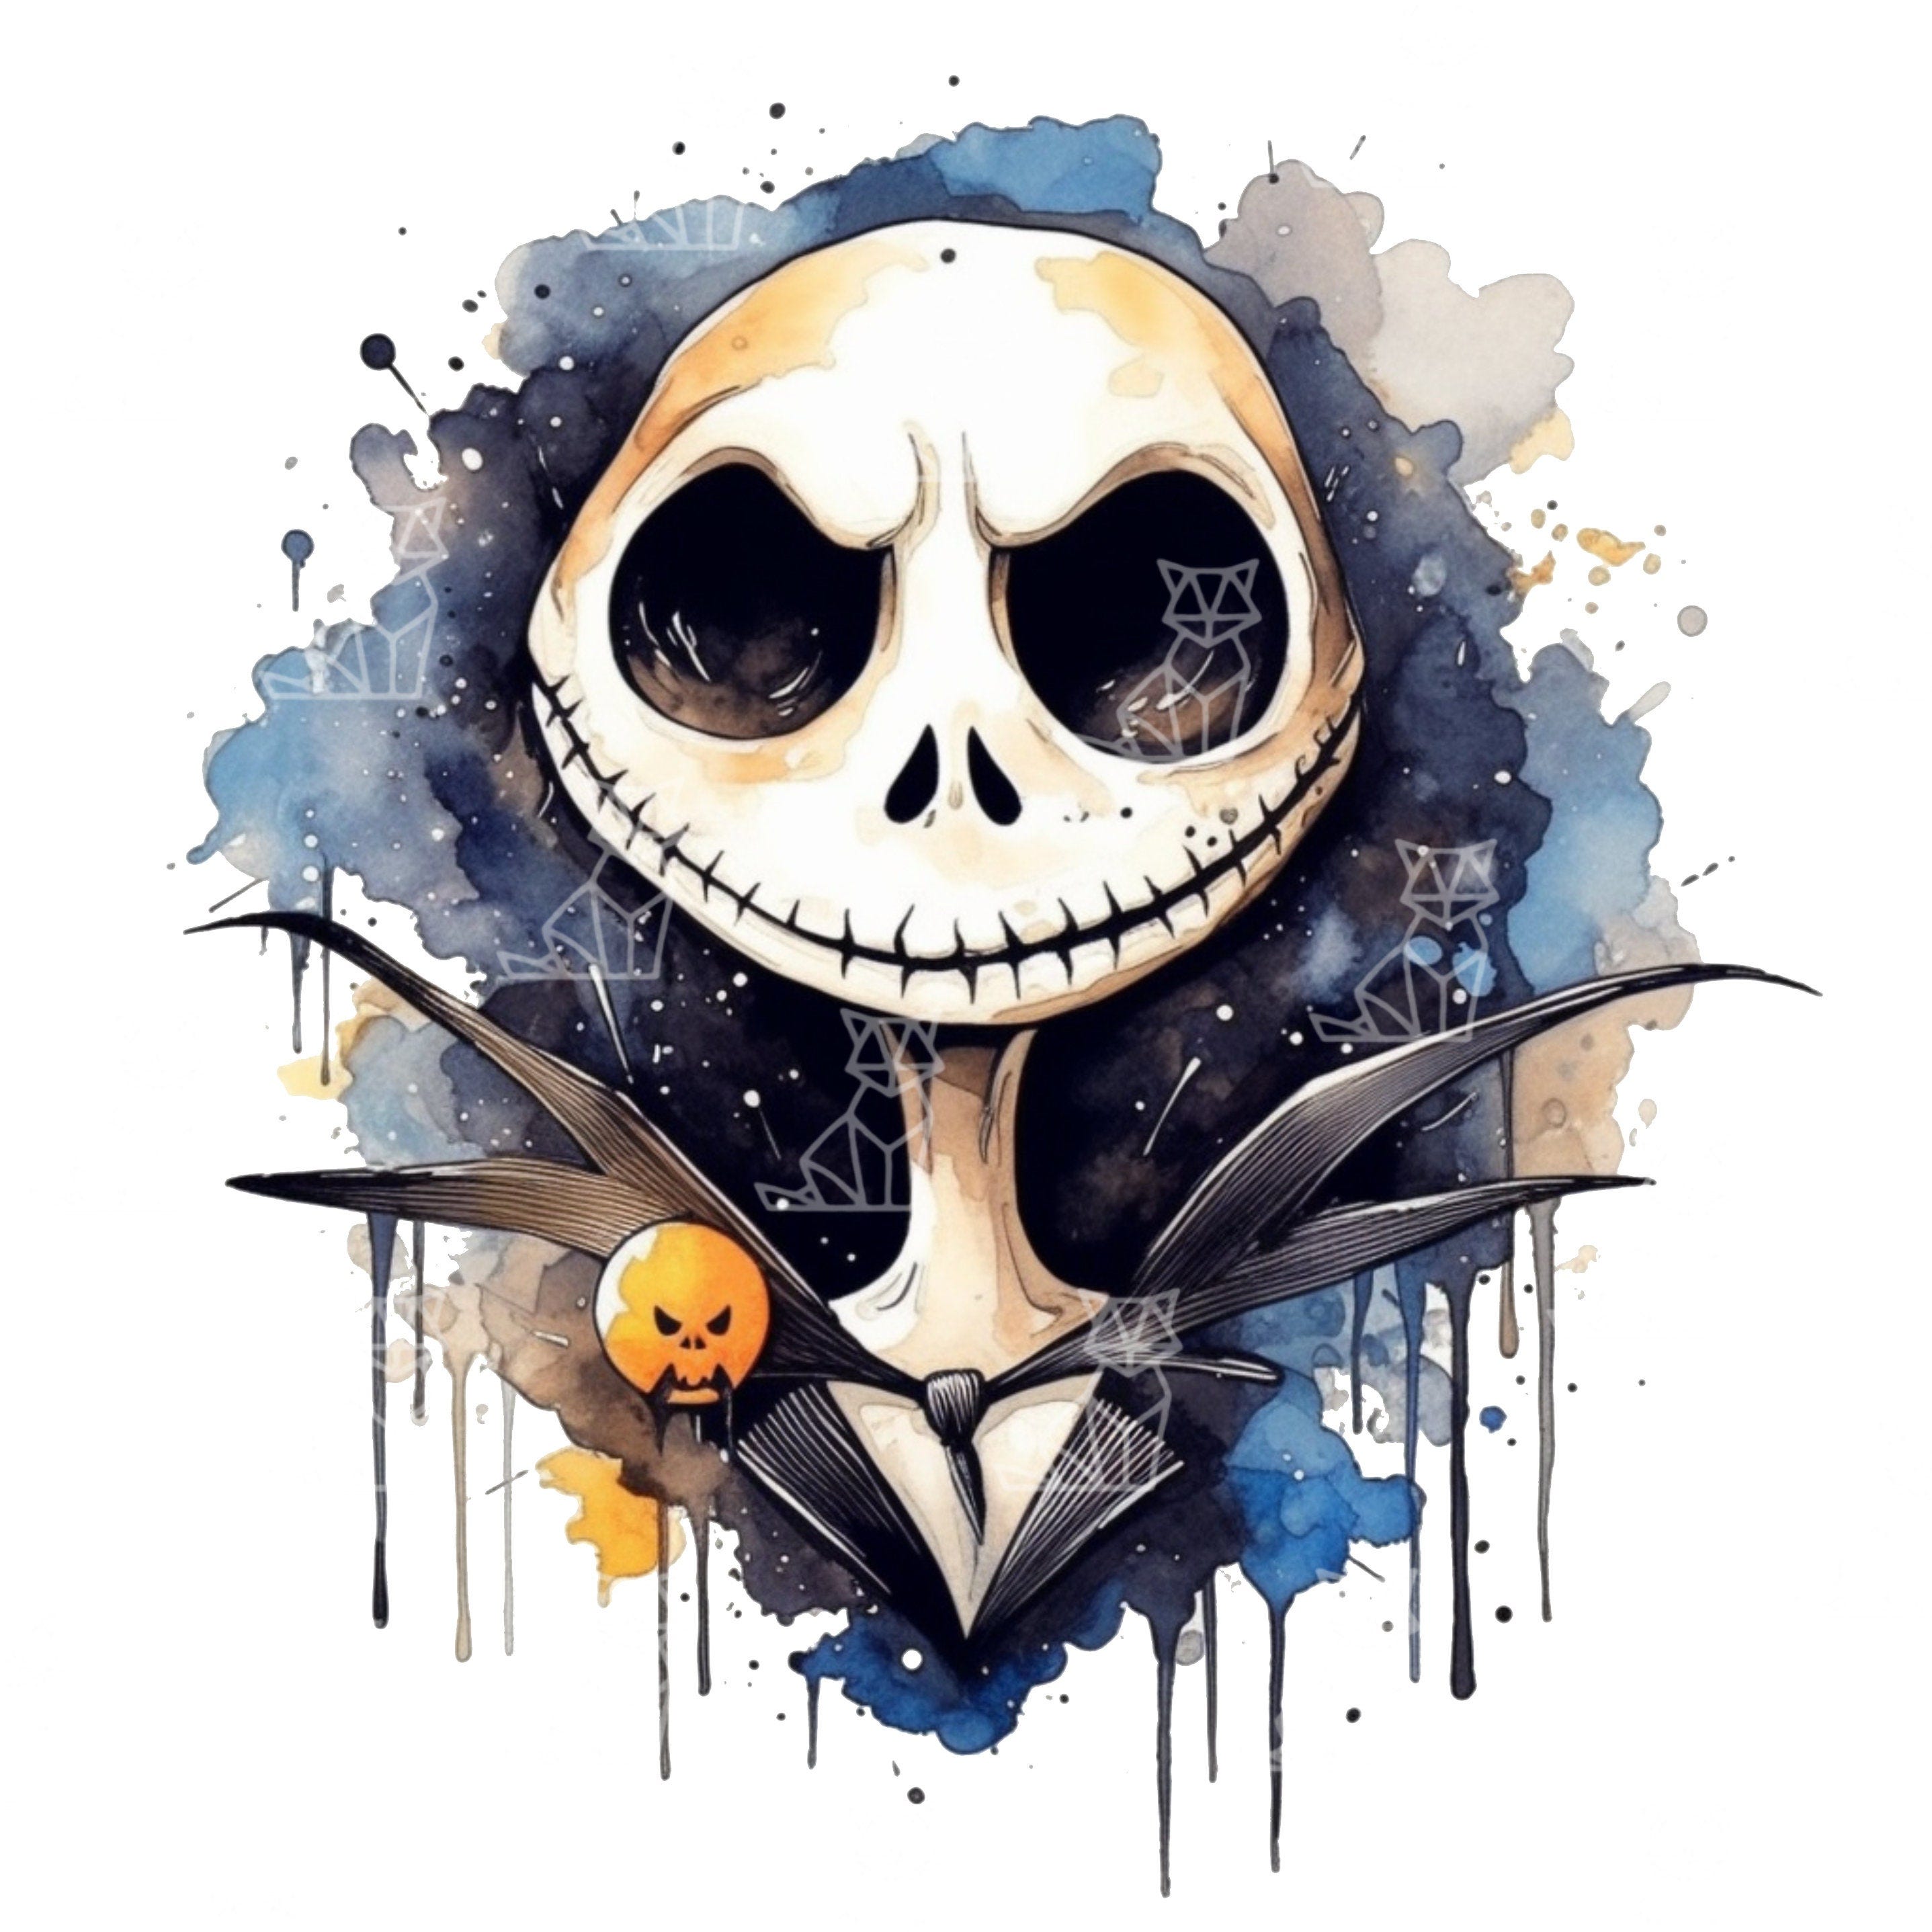 10 Nightmare Before Christmas PNG, Jack and Sally png, Jack png, Watercolor Jack Skellington PNG for T-Shirts, Posters, Jack Tumblers.